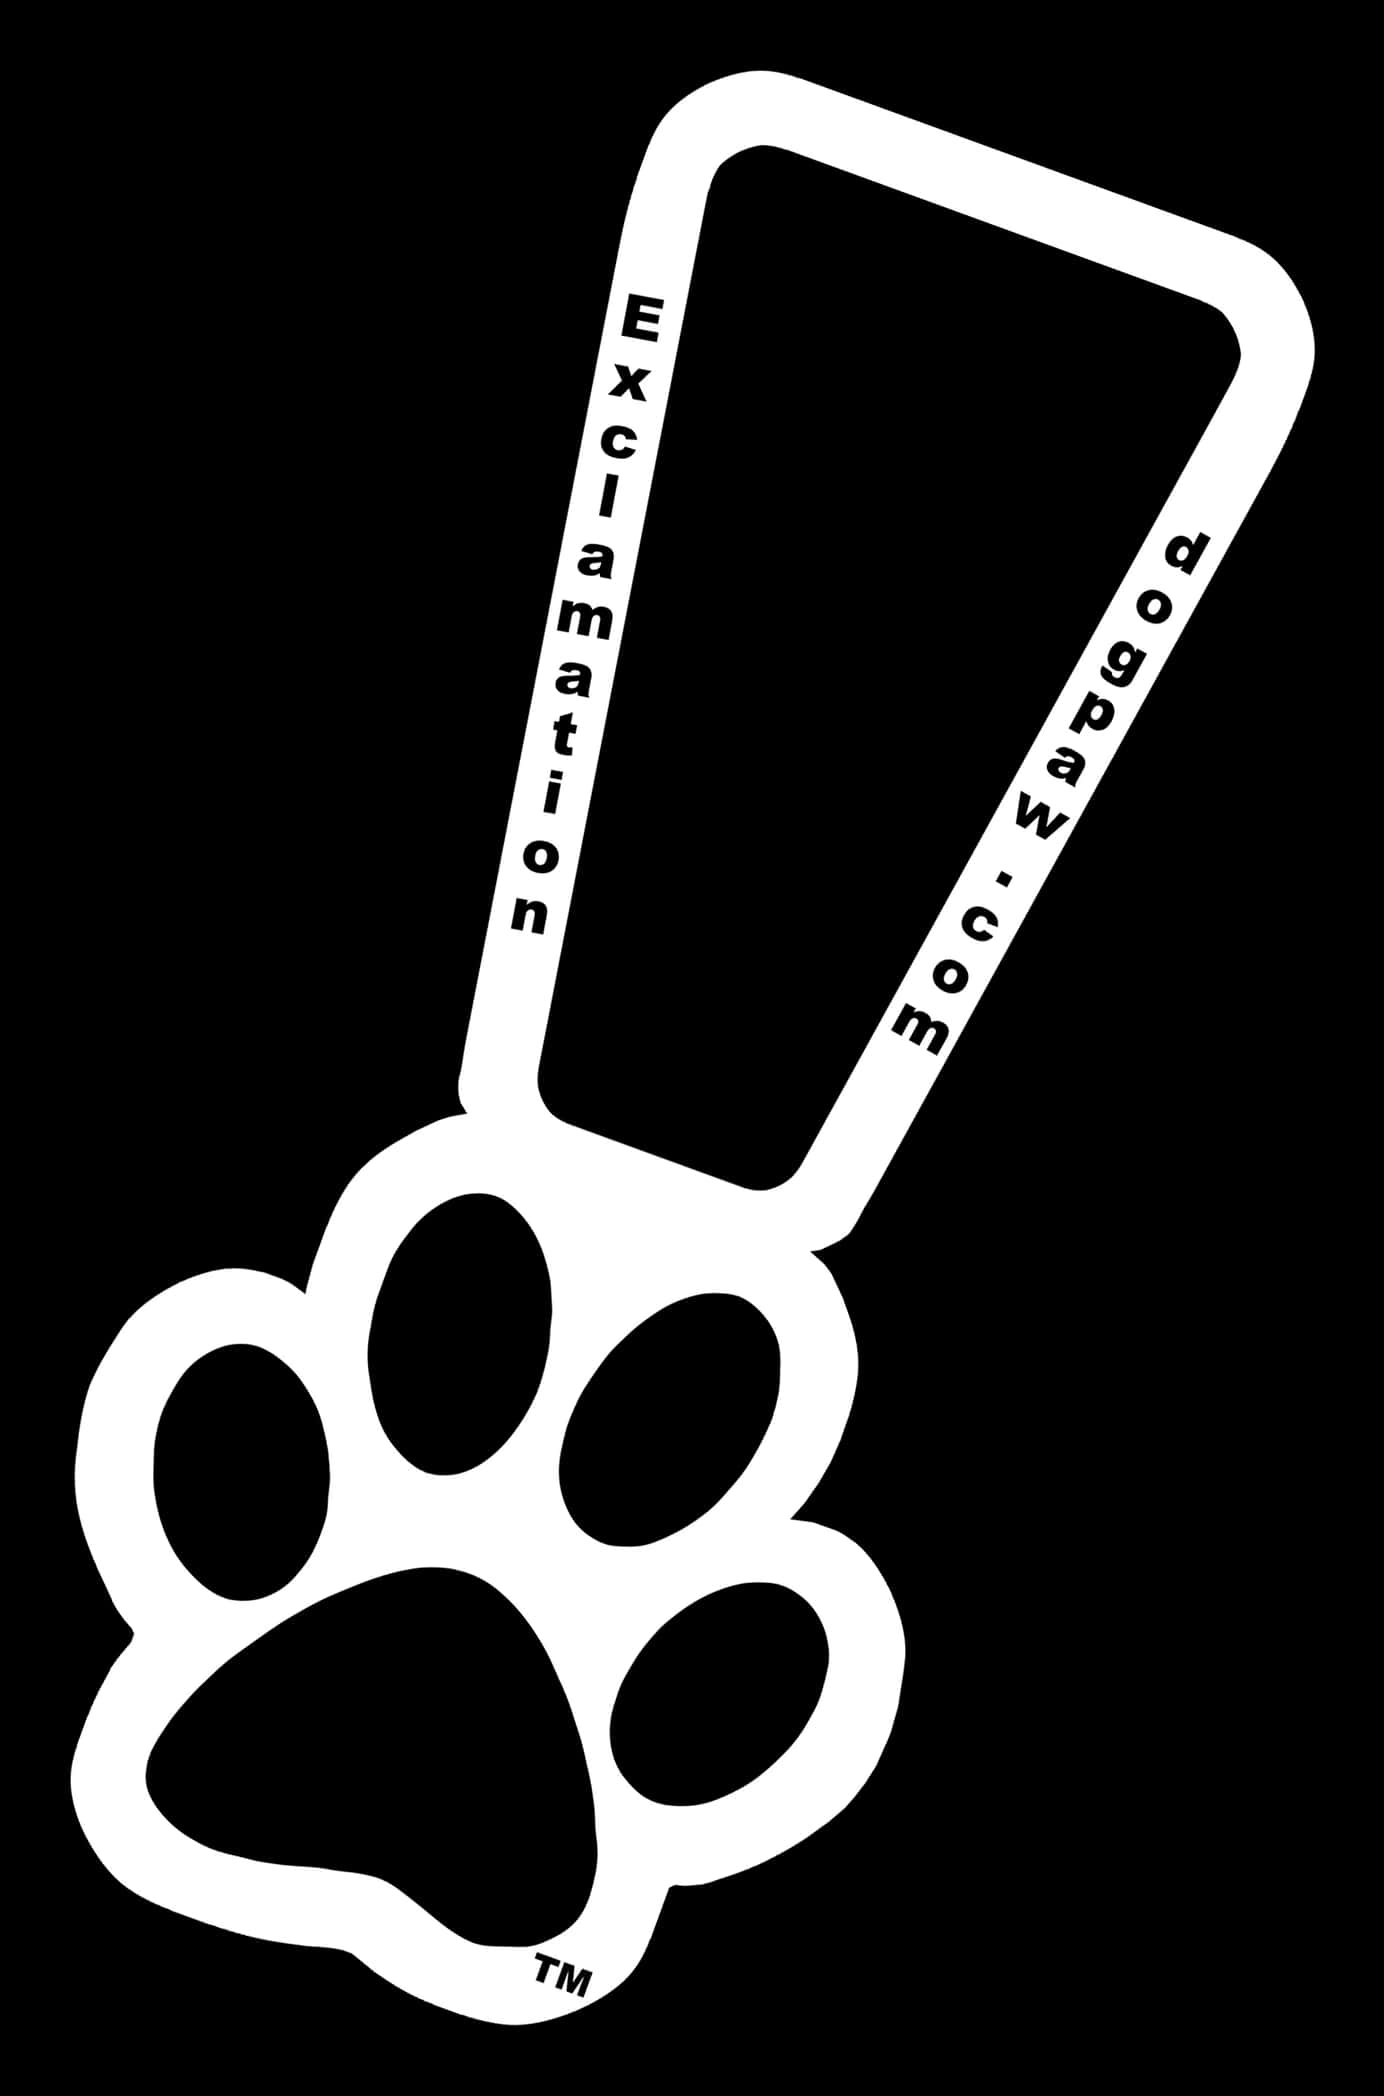 Exclamation Paw Graphic Blackand White PNG